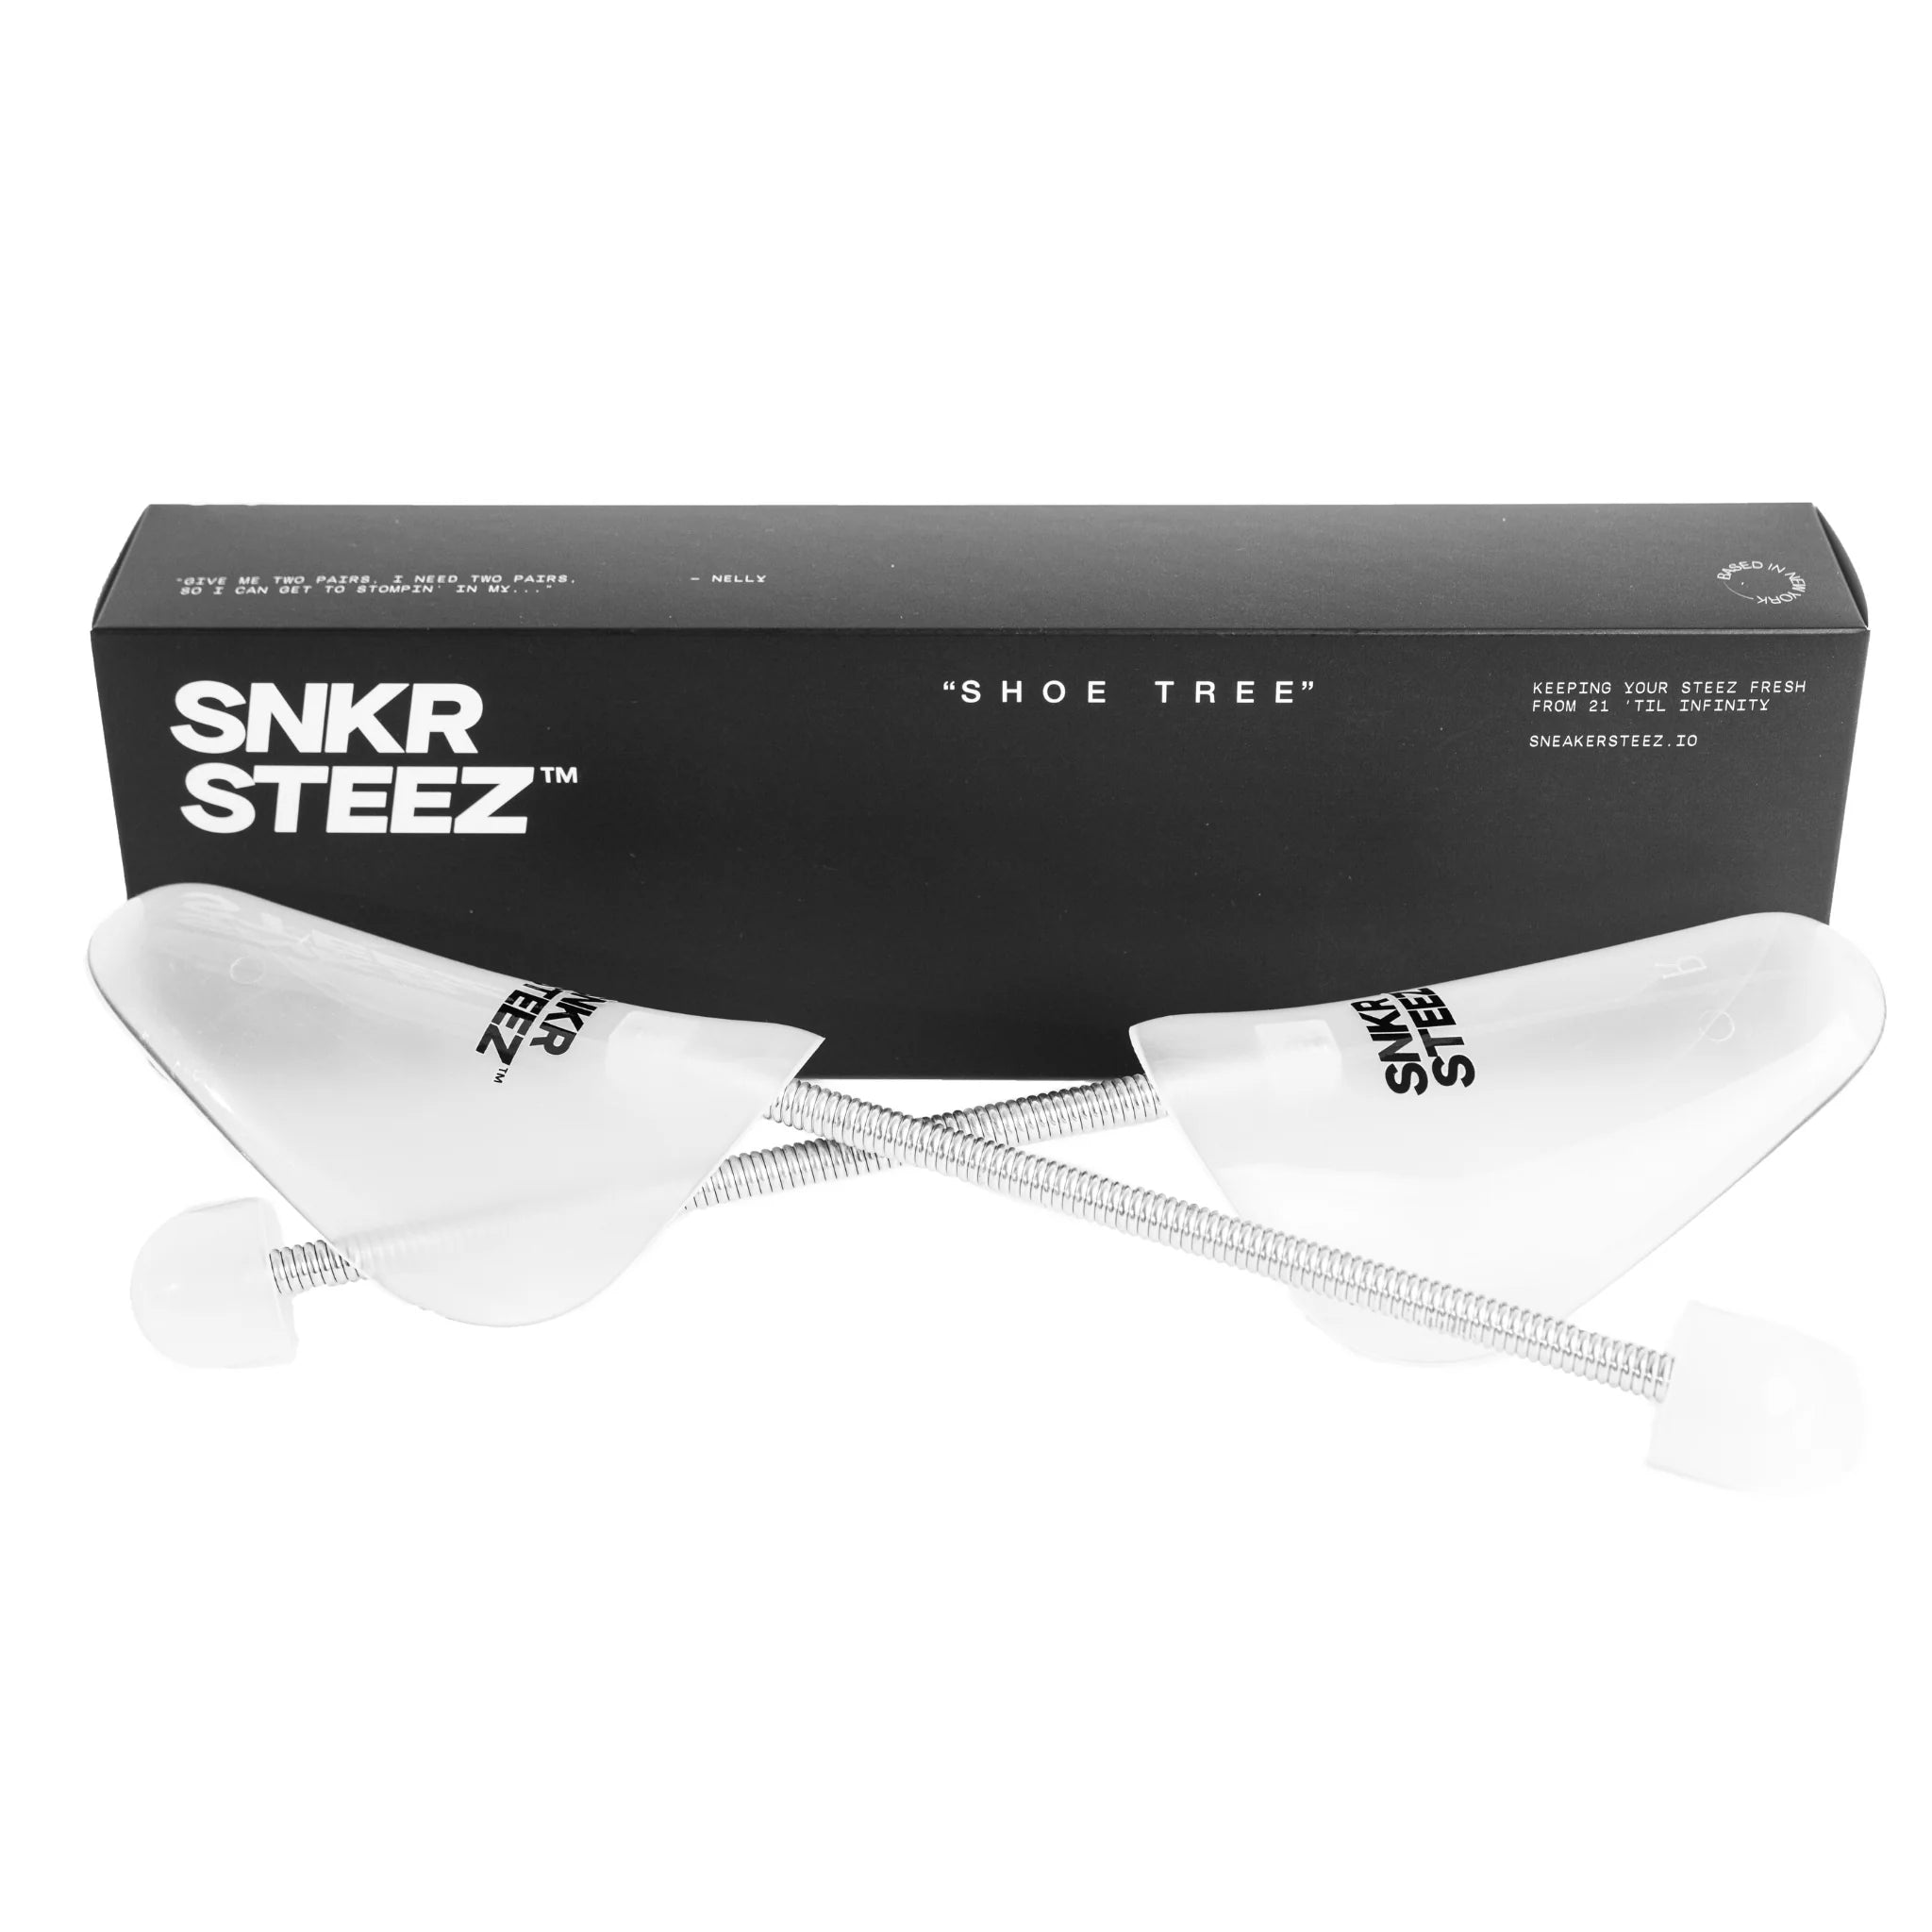 Plastic adjustable shoe tree with a black box labeled 'SNKR STEEZ' on a white background.